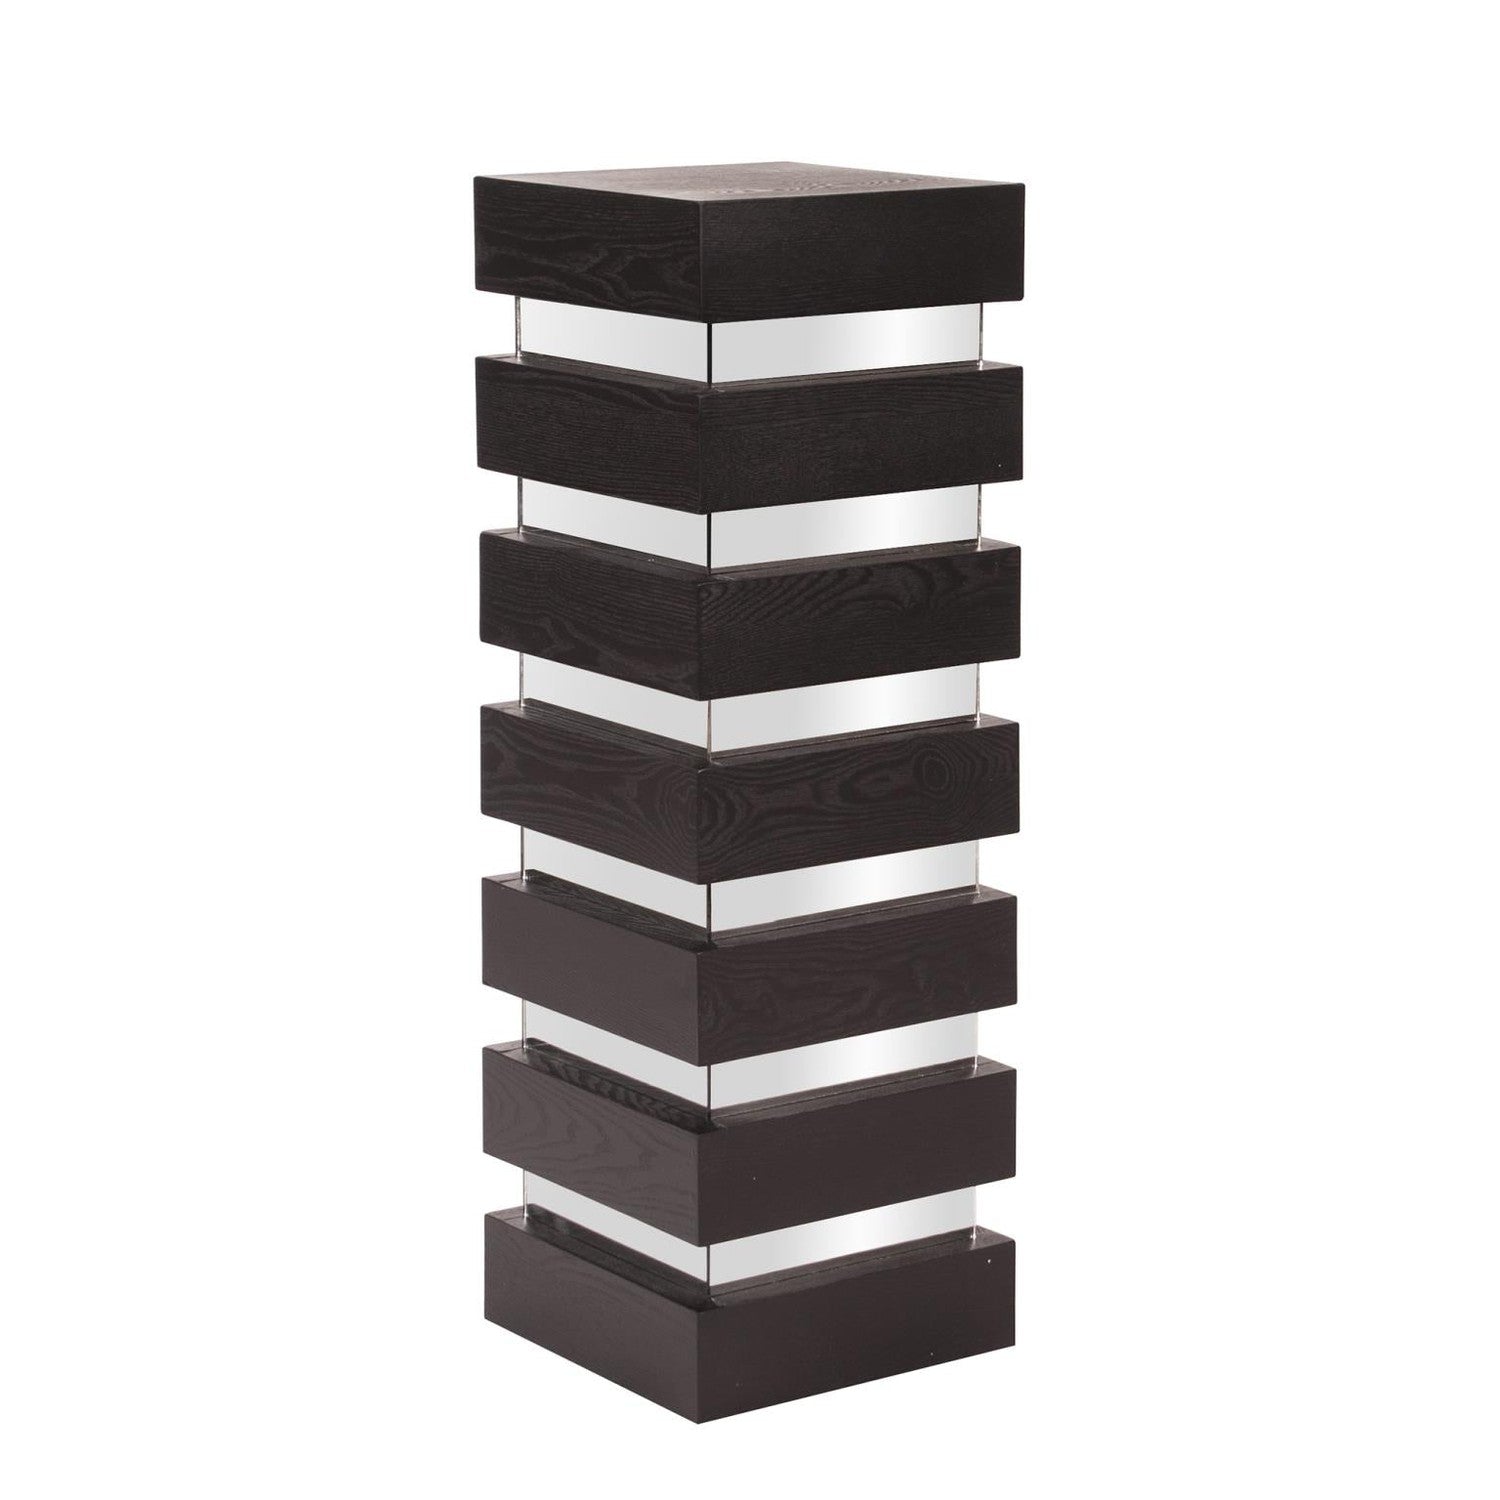 Stepped Black Wood Veneer Pedestal with Mirror - Tall-The Howard Elliott Collection-HOWARD-37125-Decor-3-France and Son